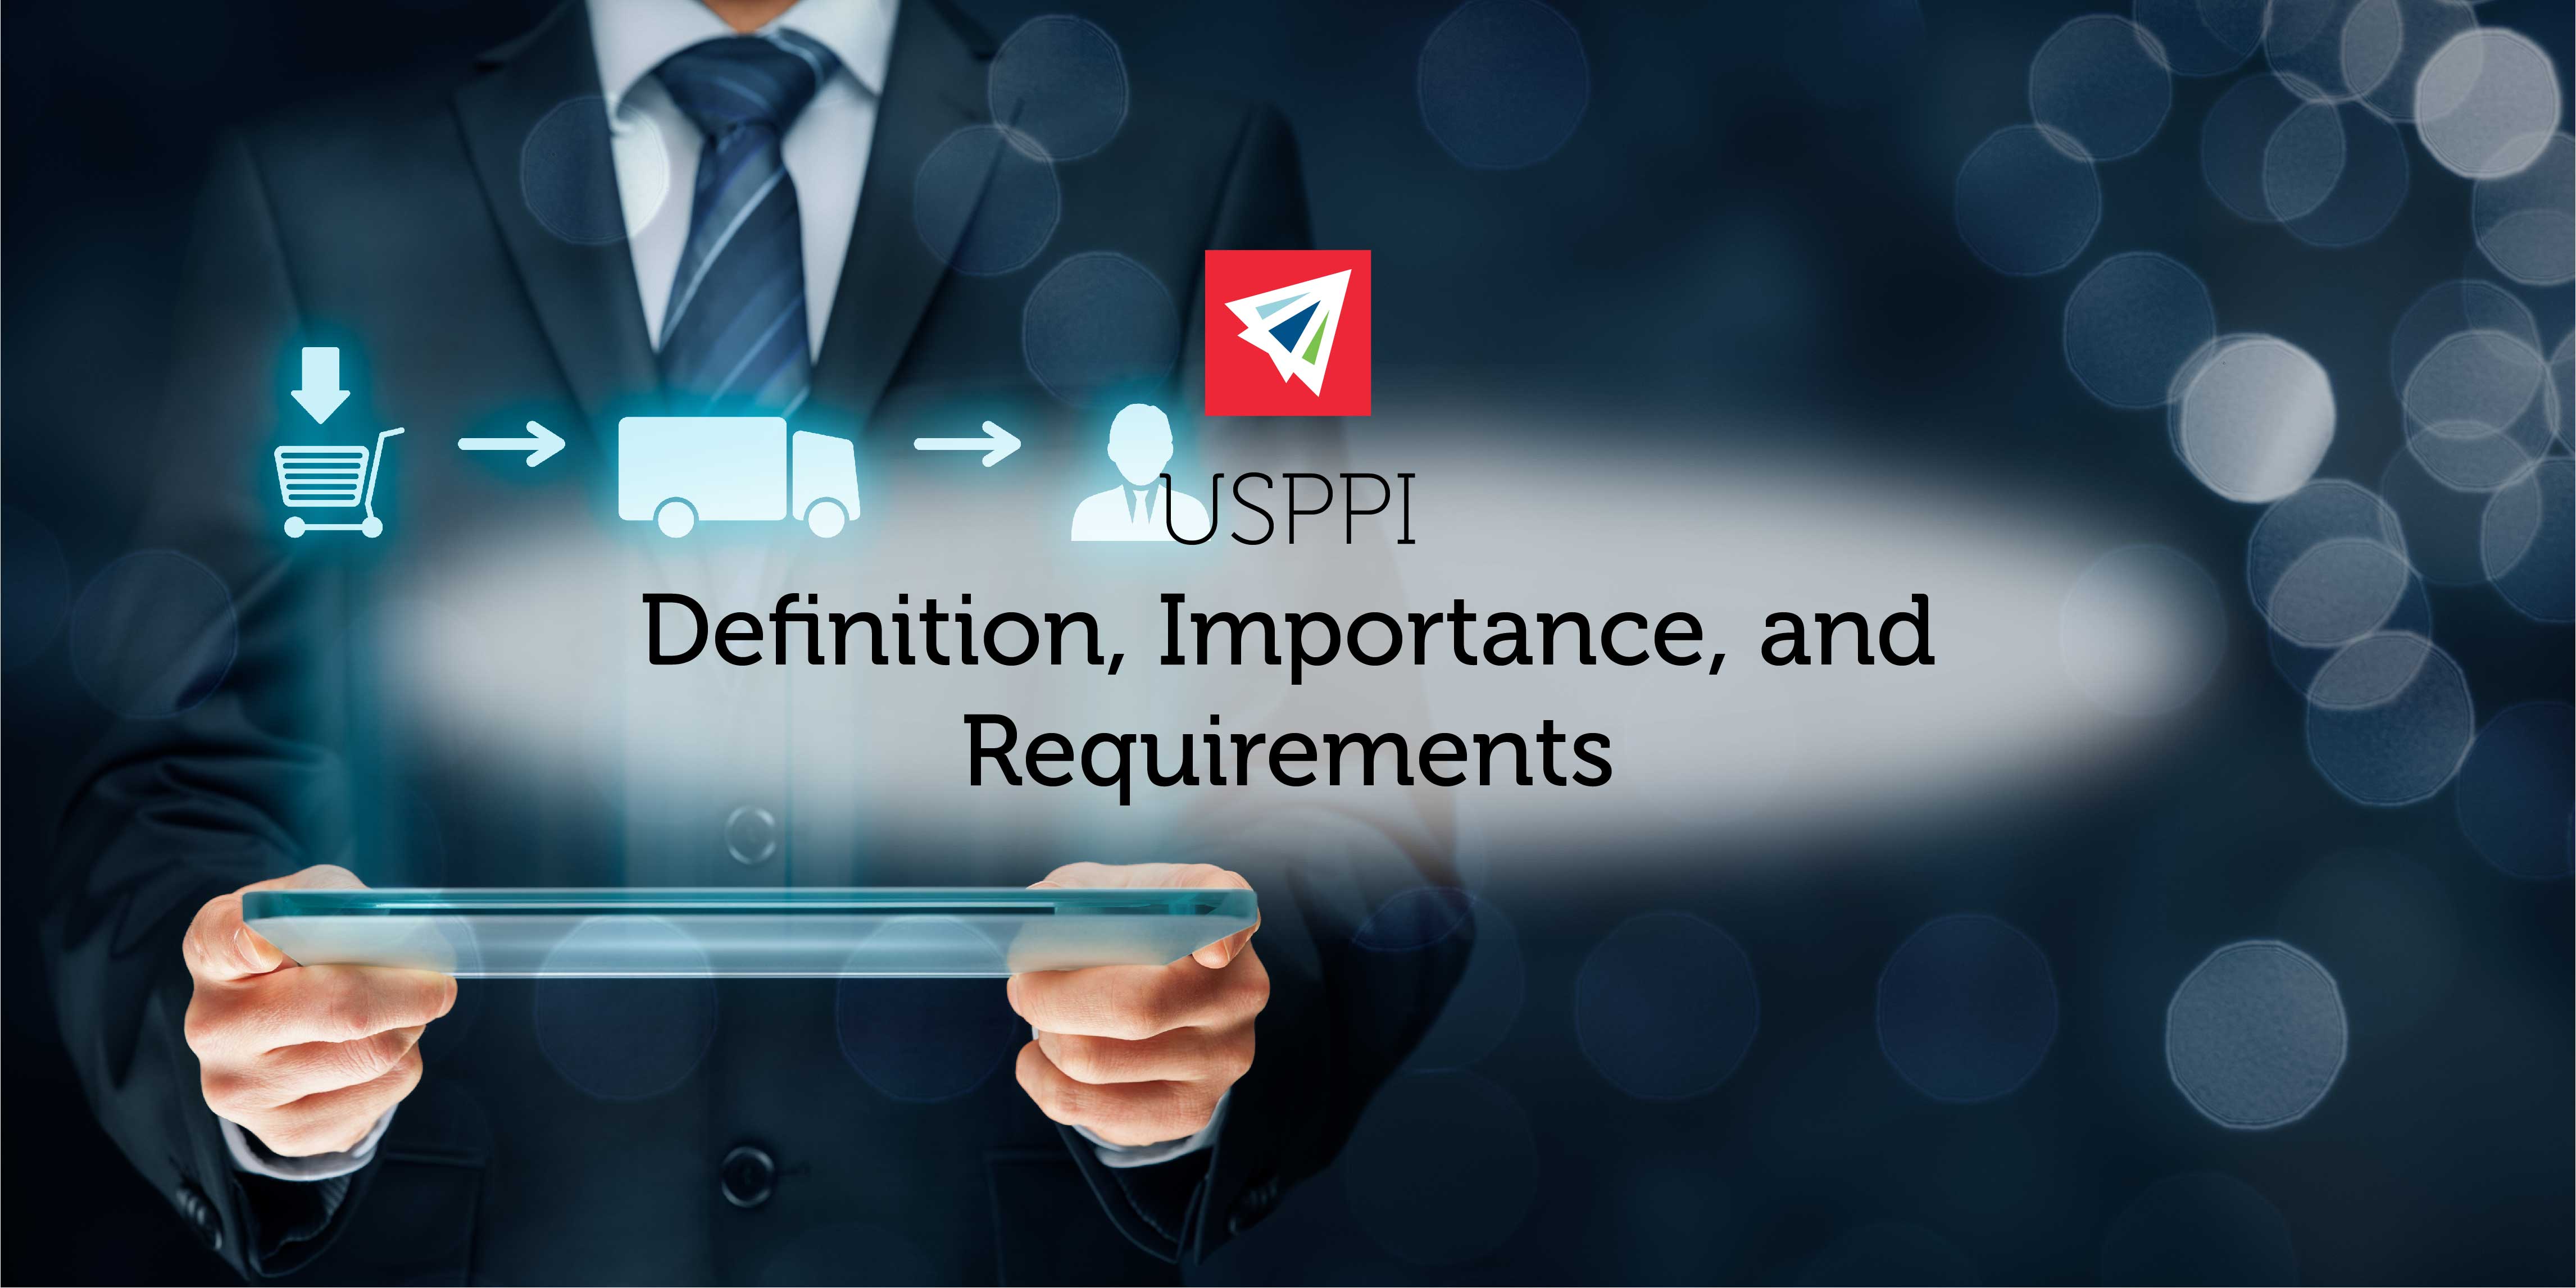 USPPI: Definition, Importance, and Requirements